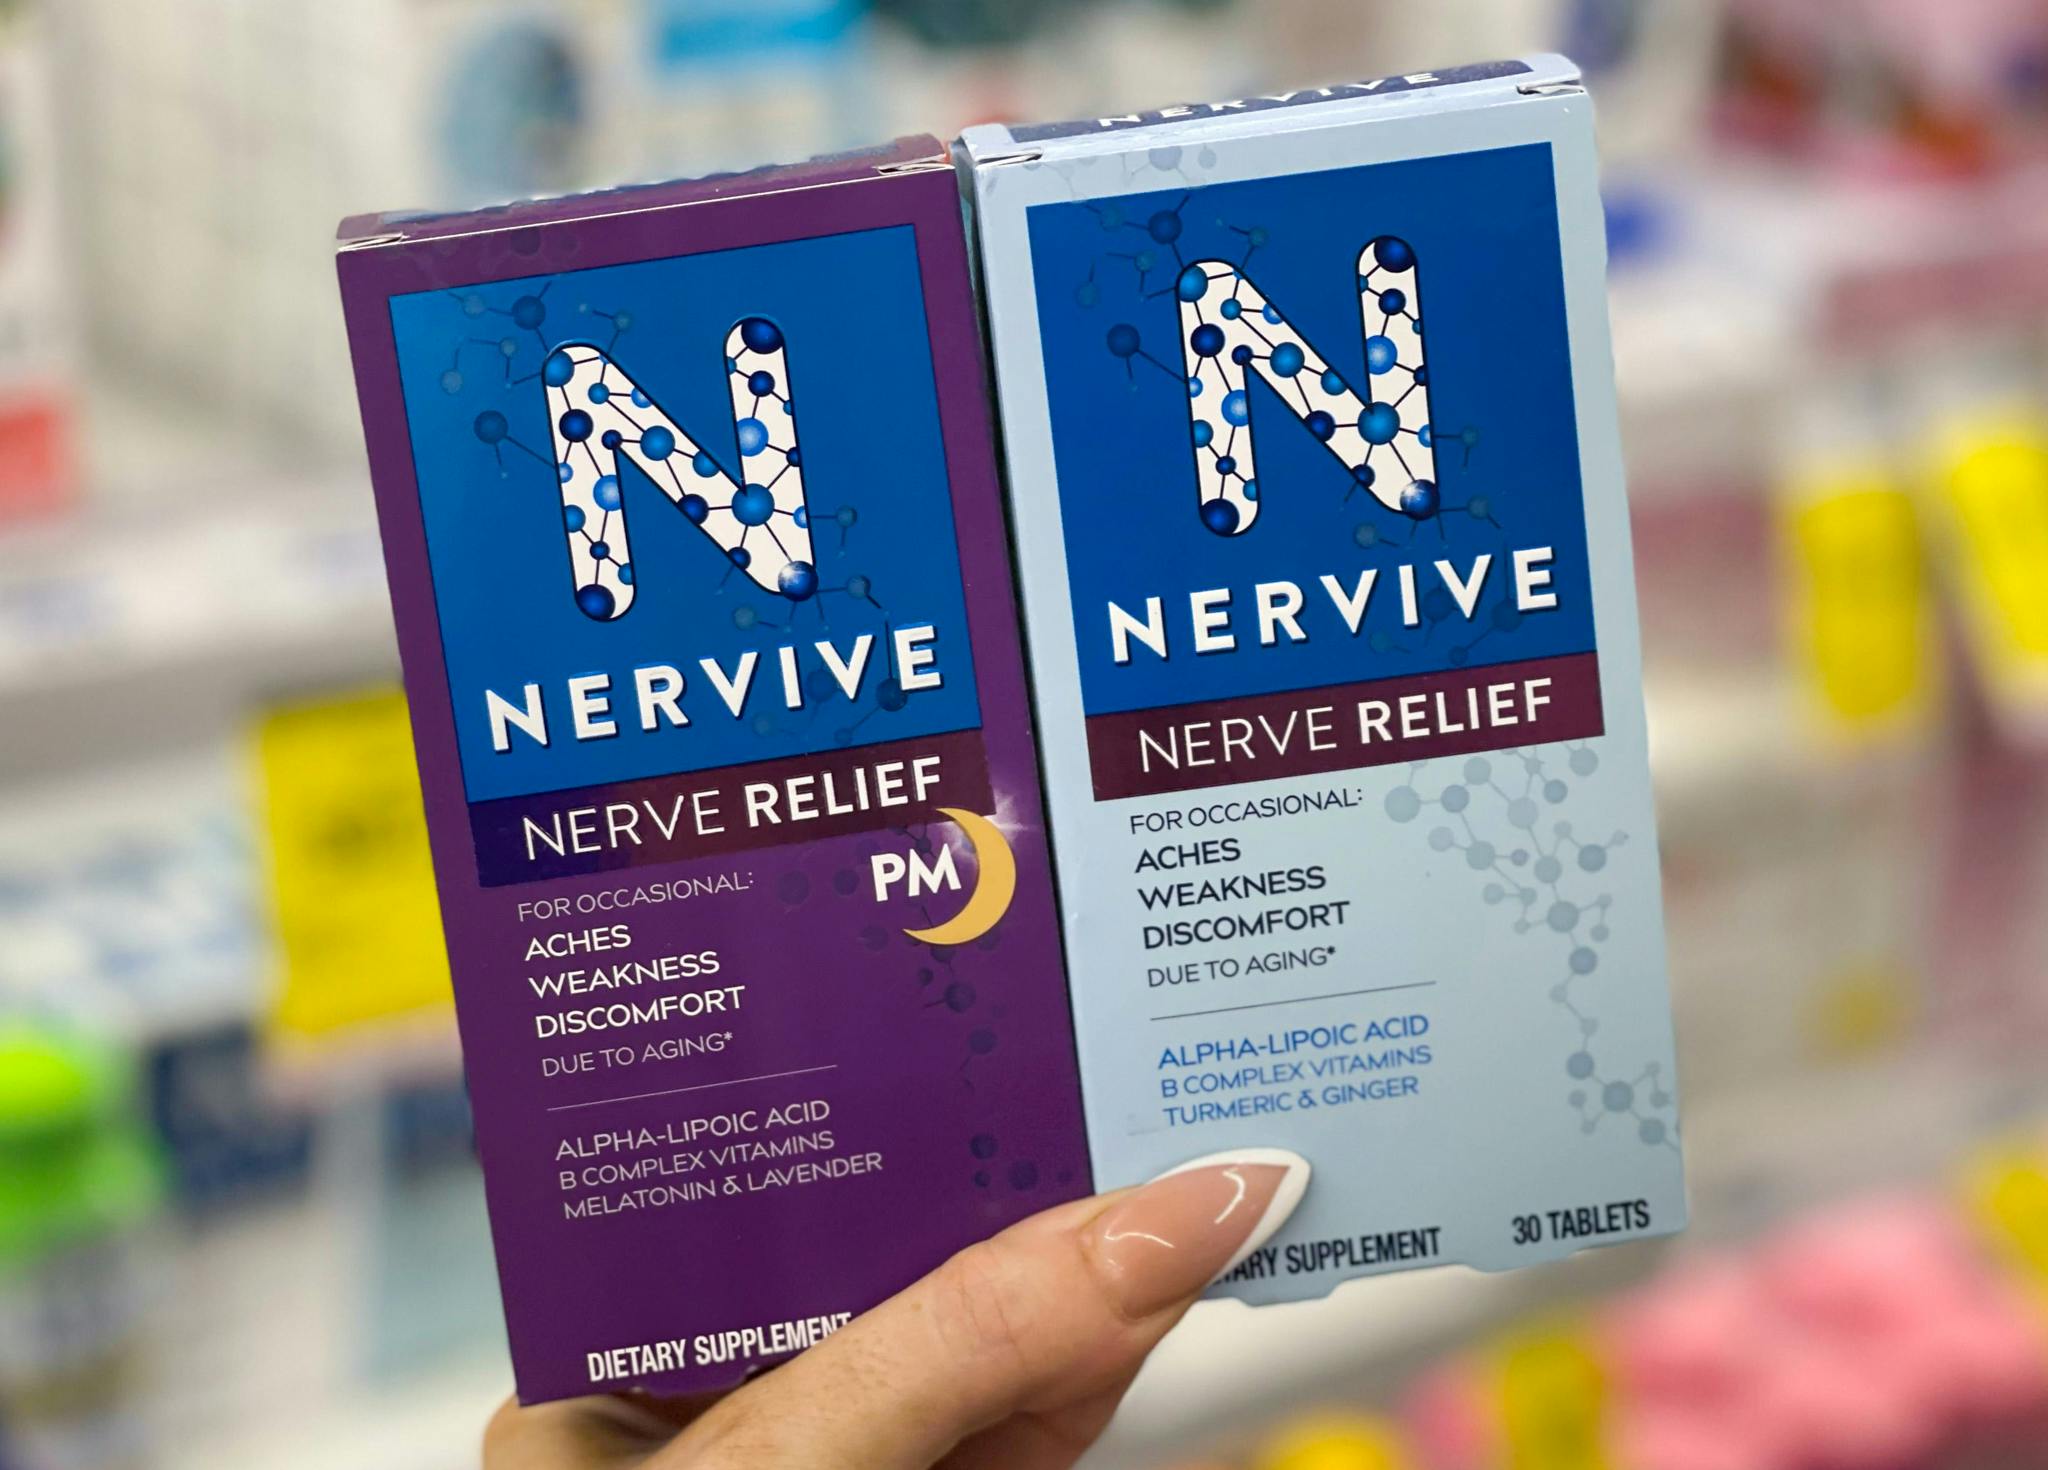 two boxes of nervive nerve relief held in hand